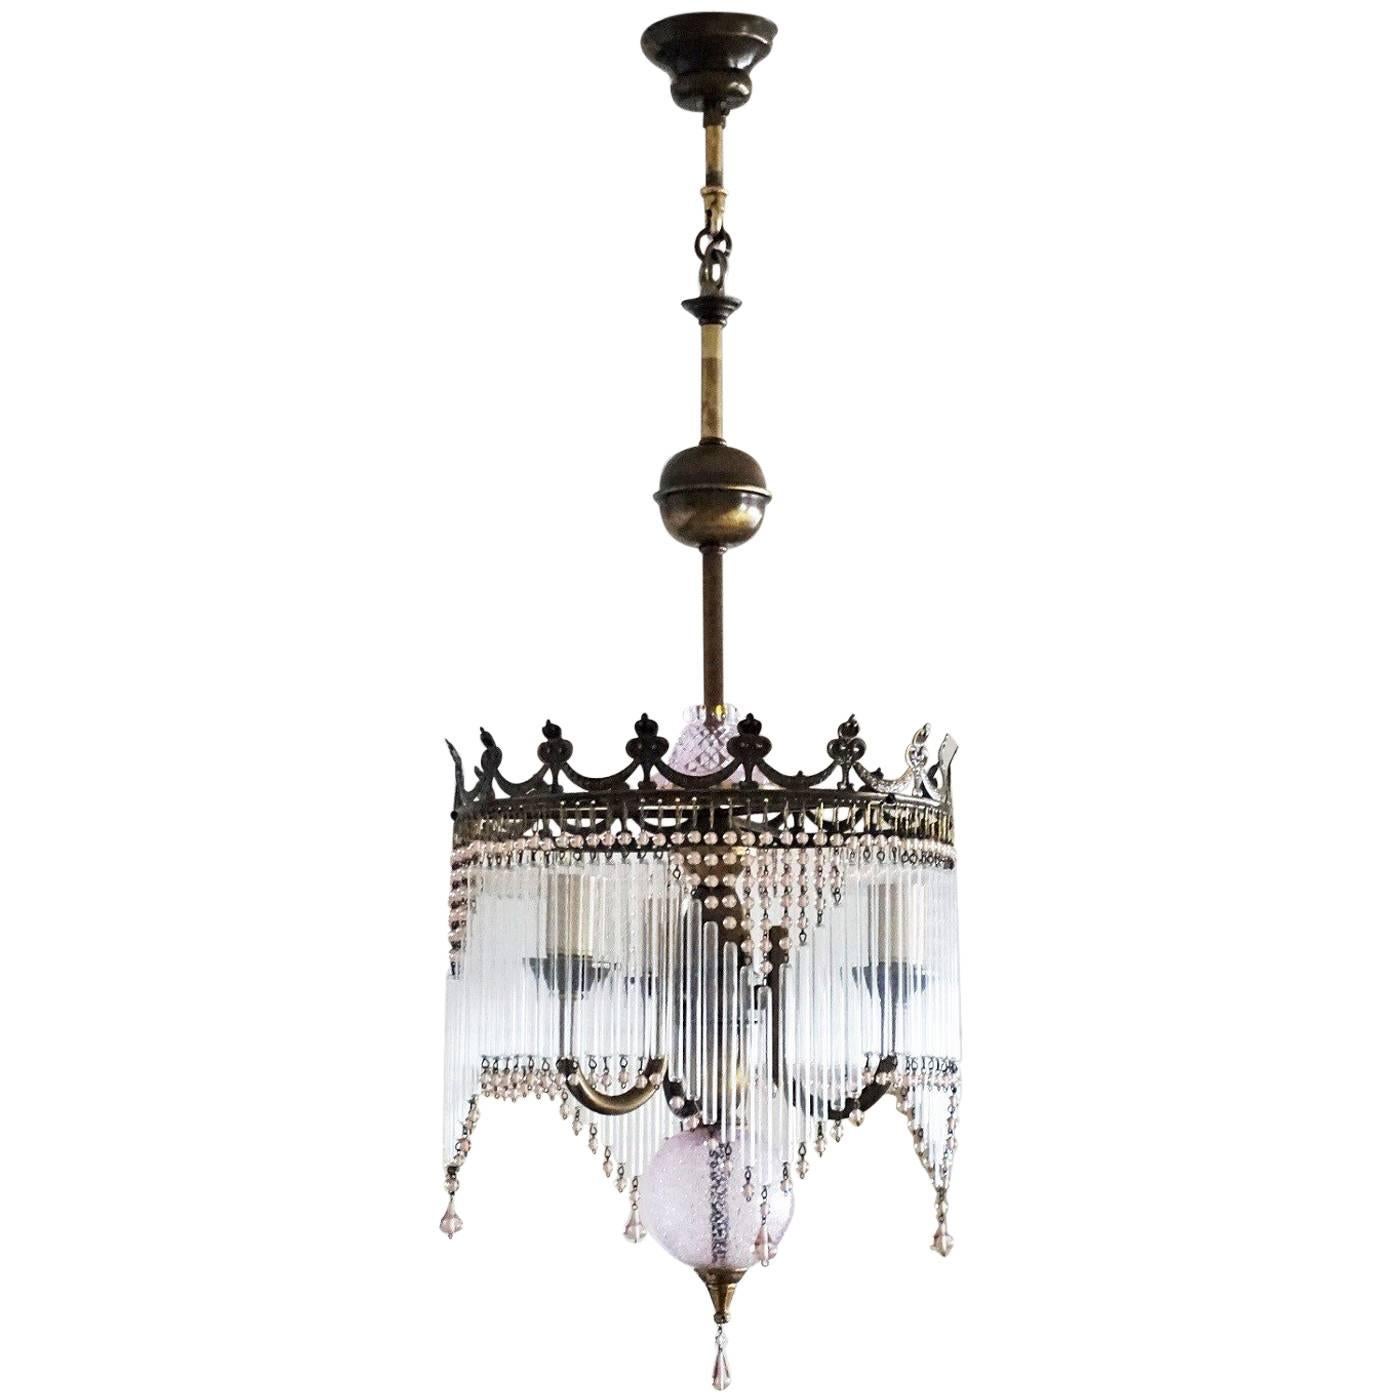 Mid-20th Century French Vintage Three-Light Chandelier with Glass Rods